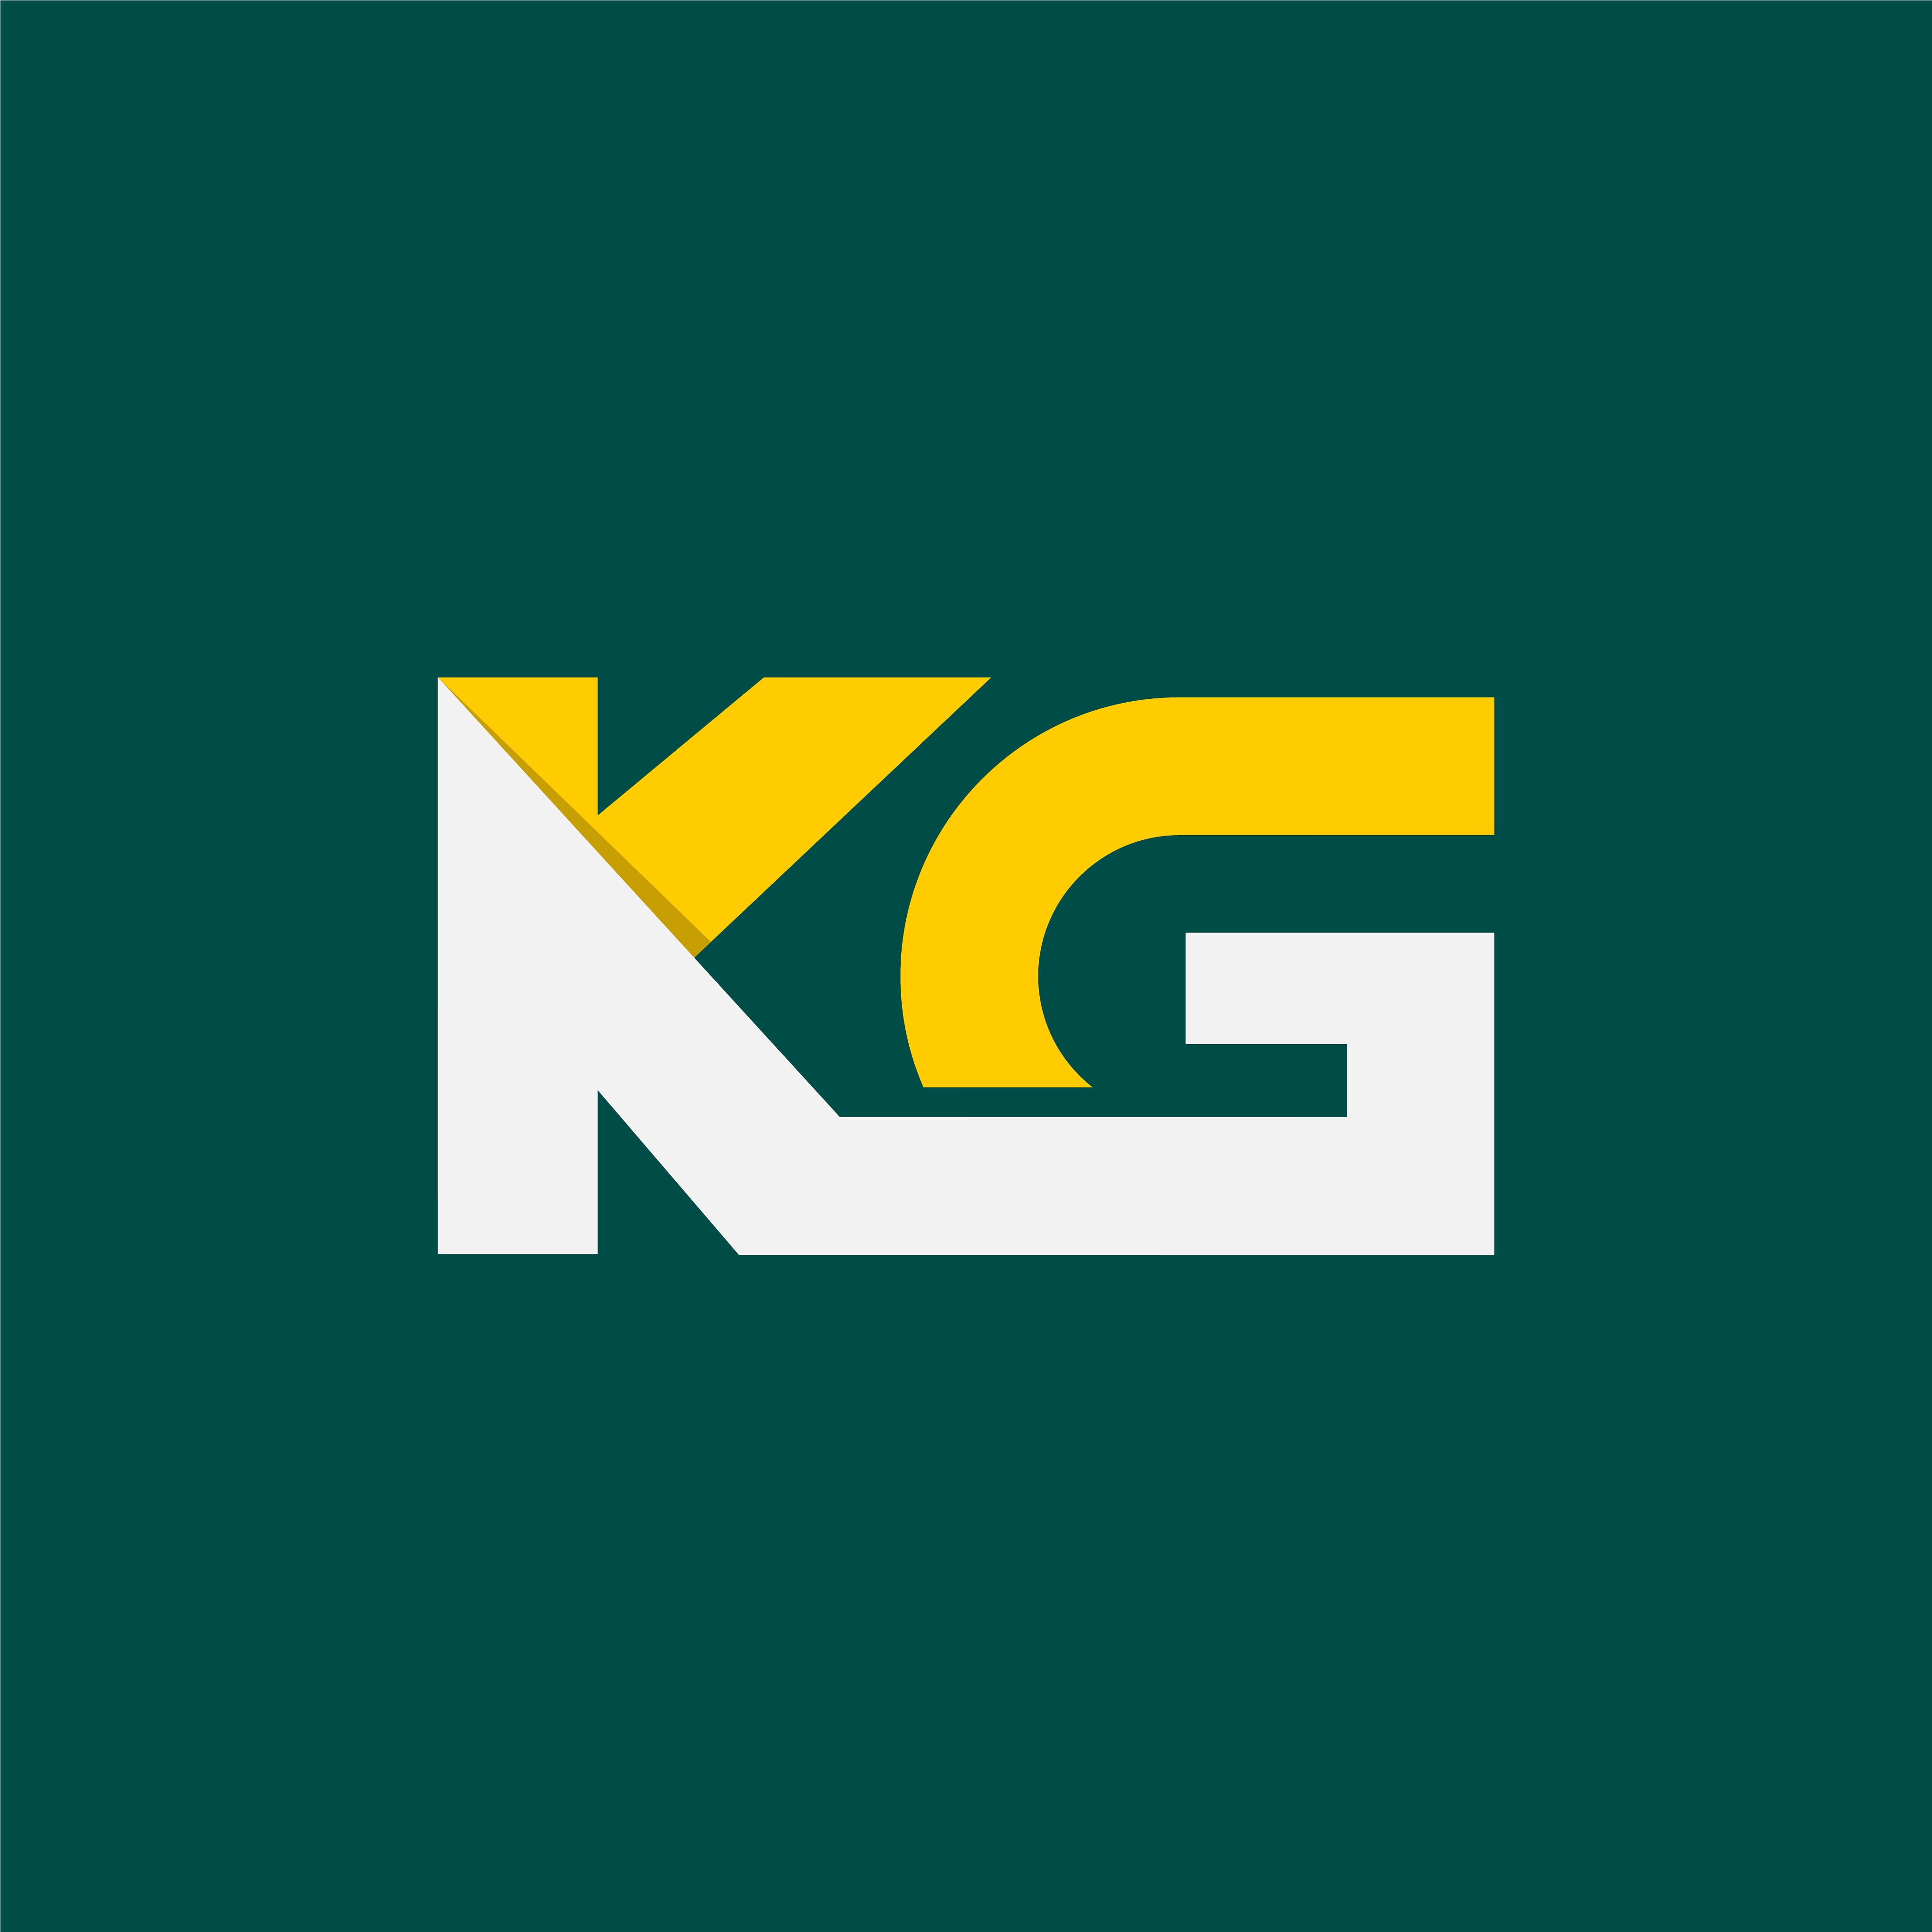 Kaiglo Express and Logistics Limited provider